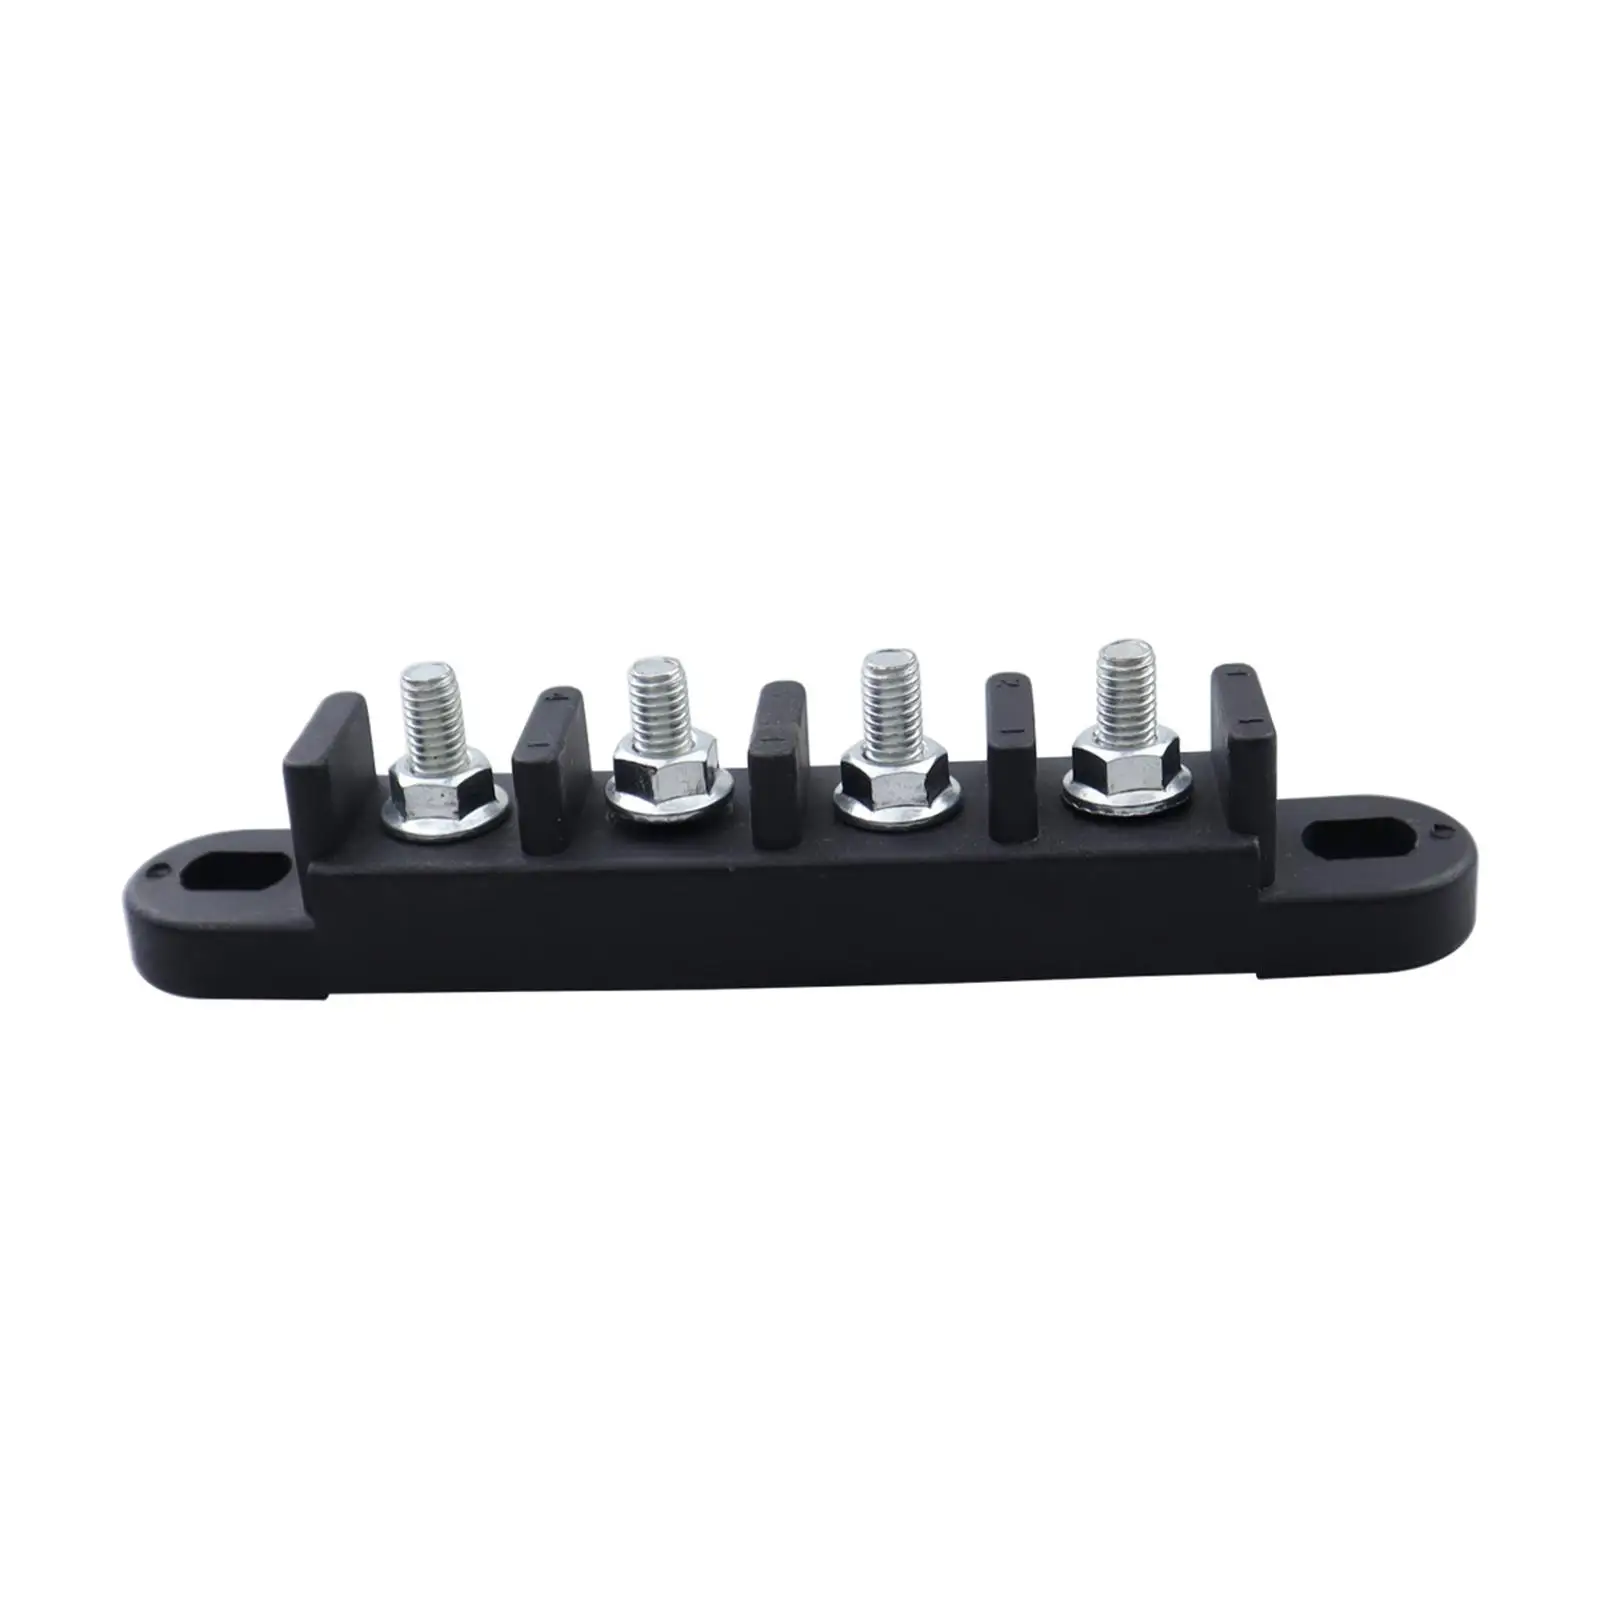 Keyed Busbar Accessory Out 35 Amp Plug and Play Professional Easy Installation Directly Replace for Honda Talon Accessory